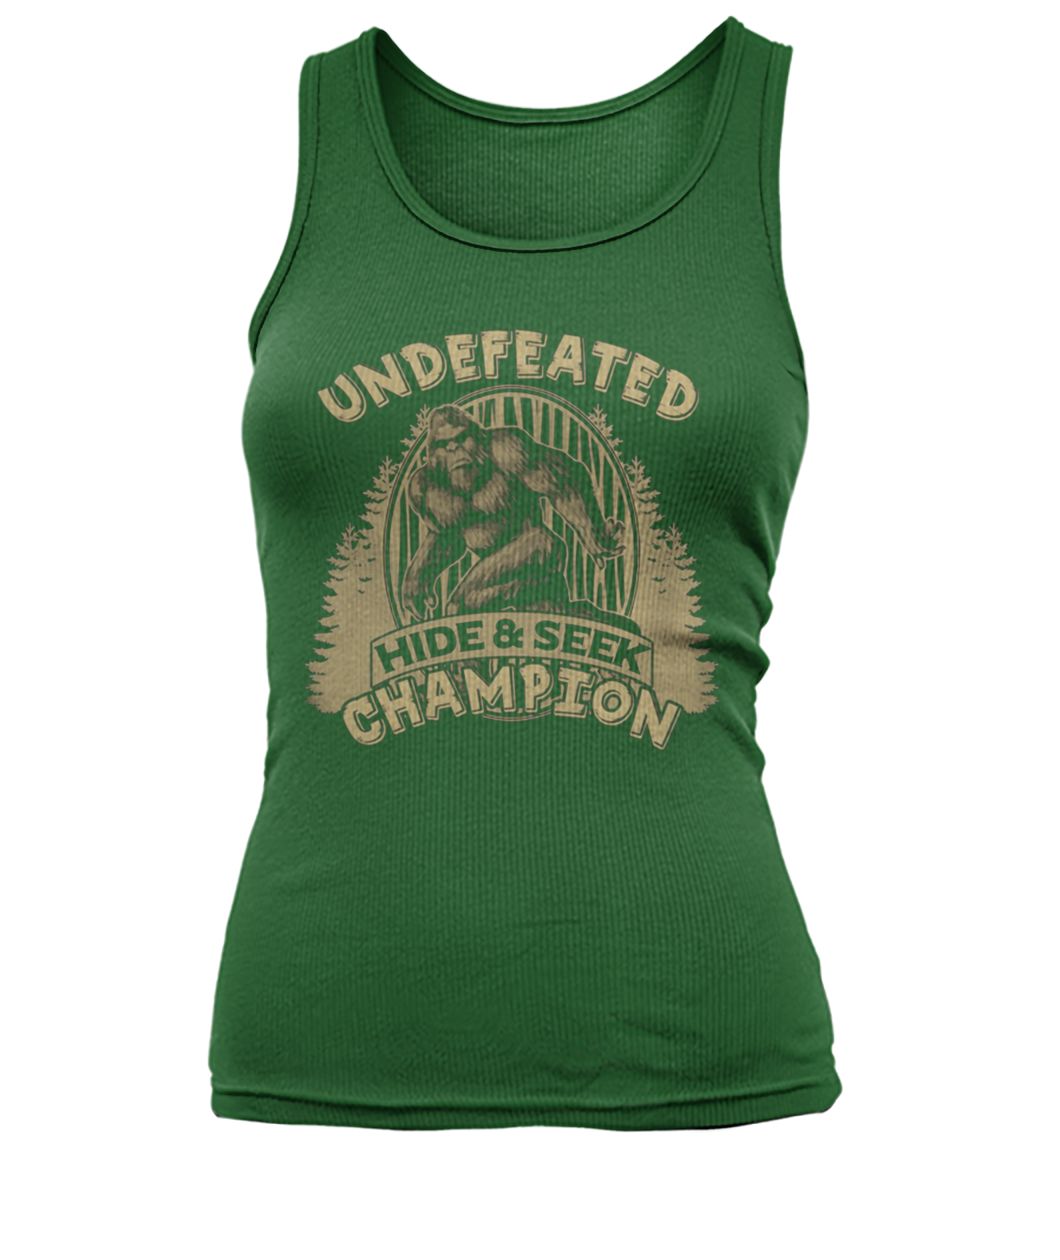 Bigfoot undefeated hide and seek champion women's tank top